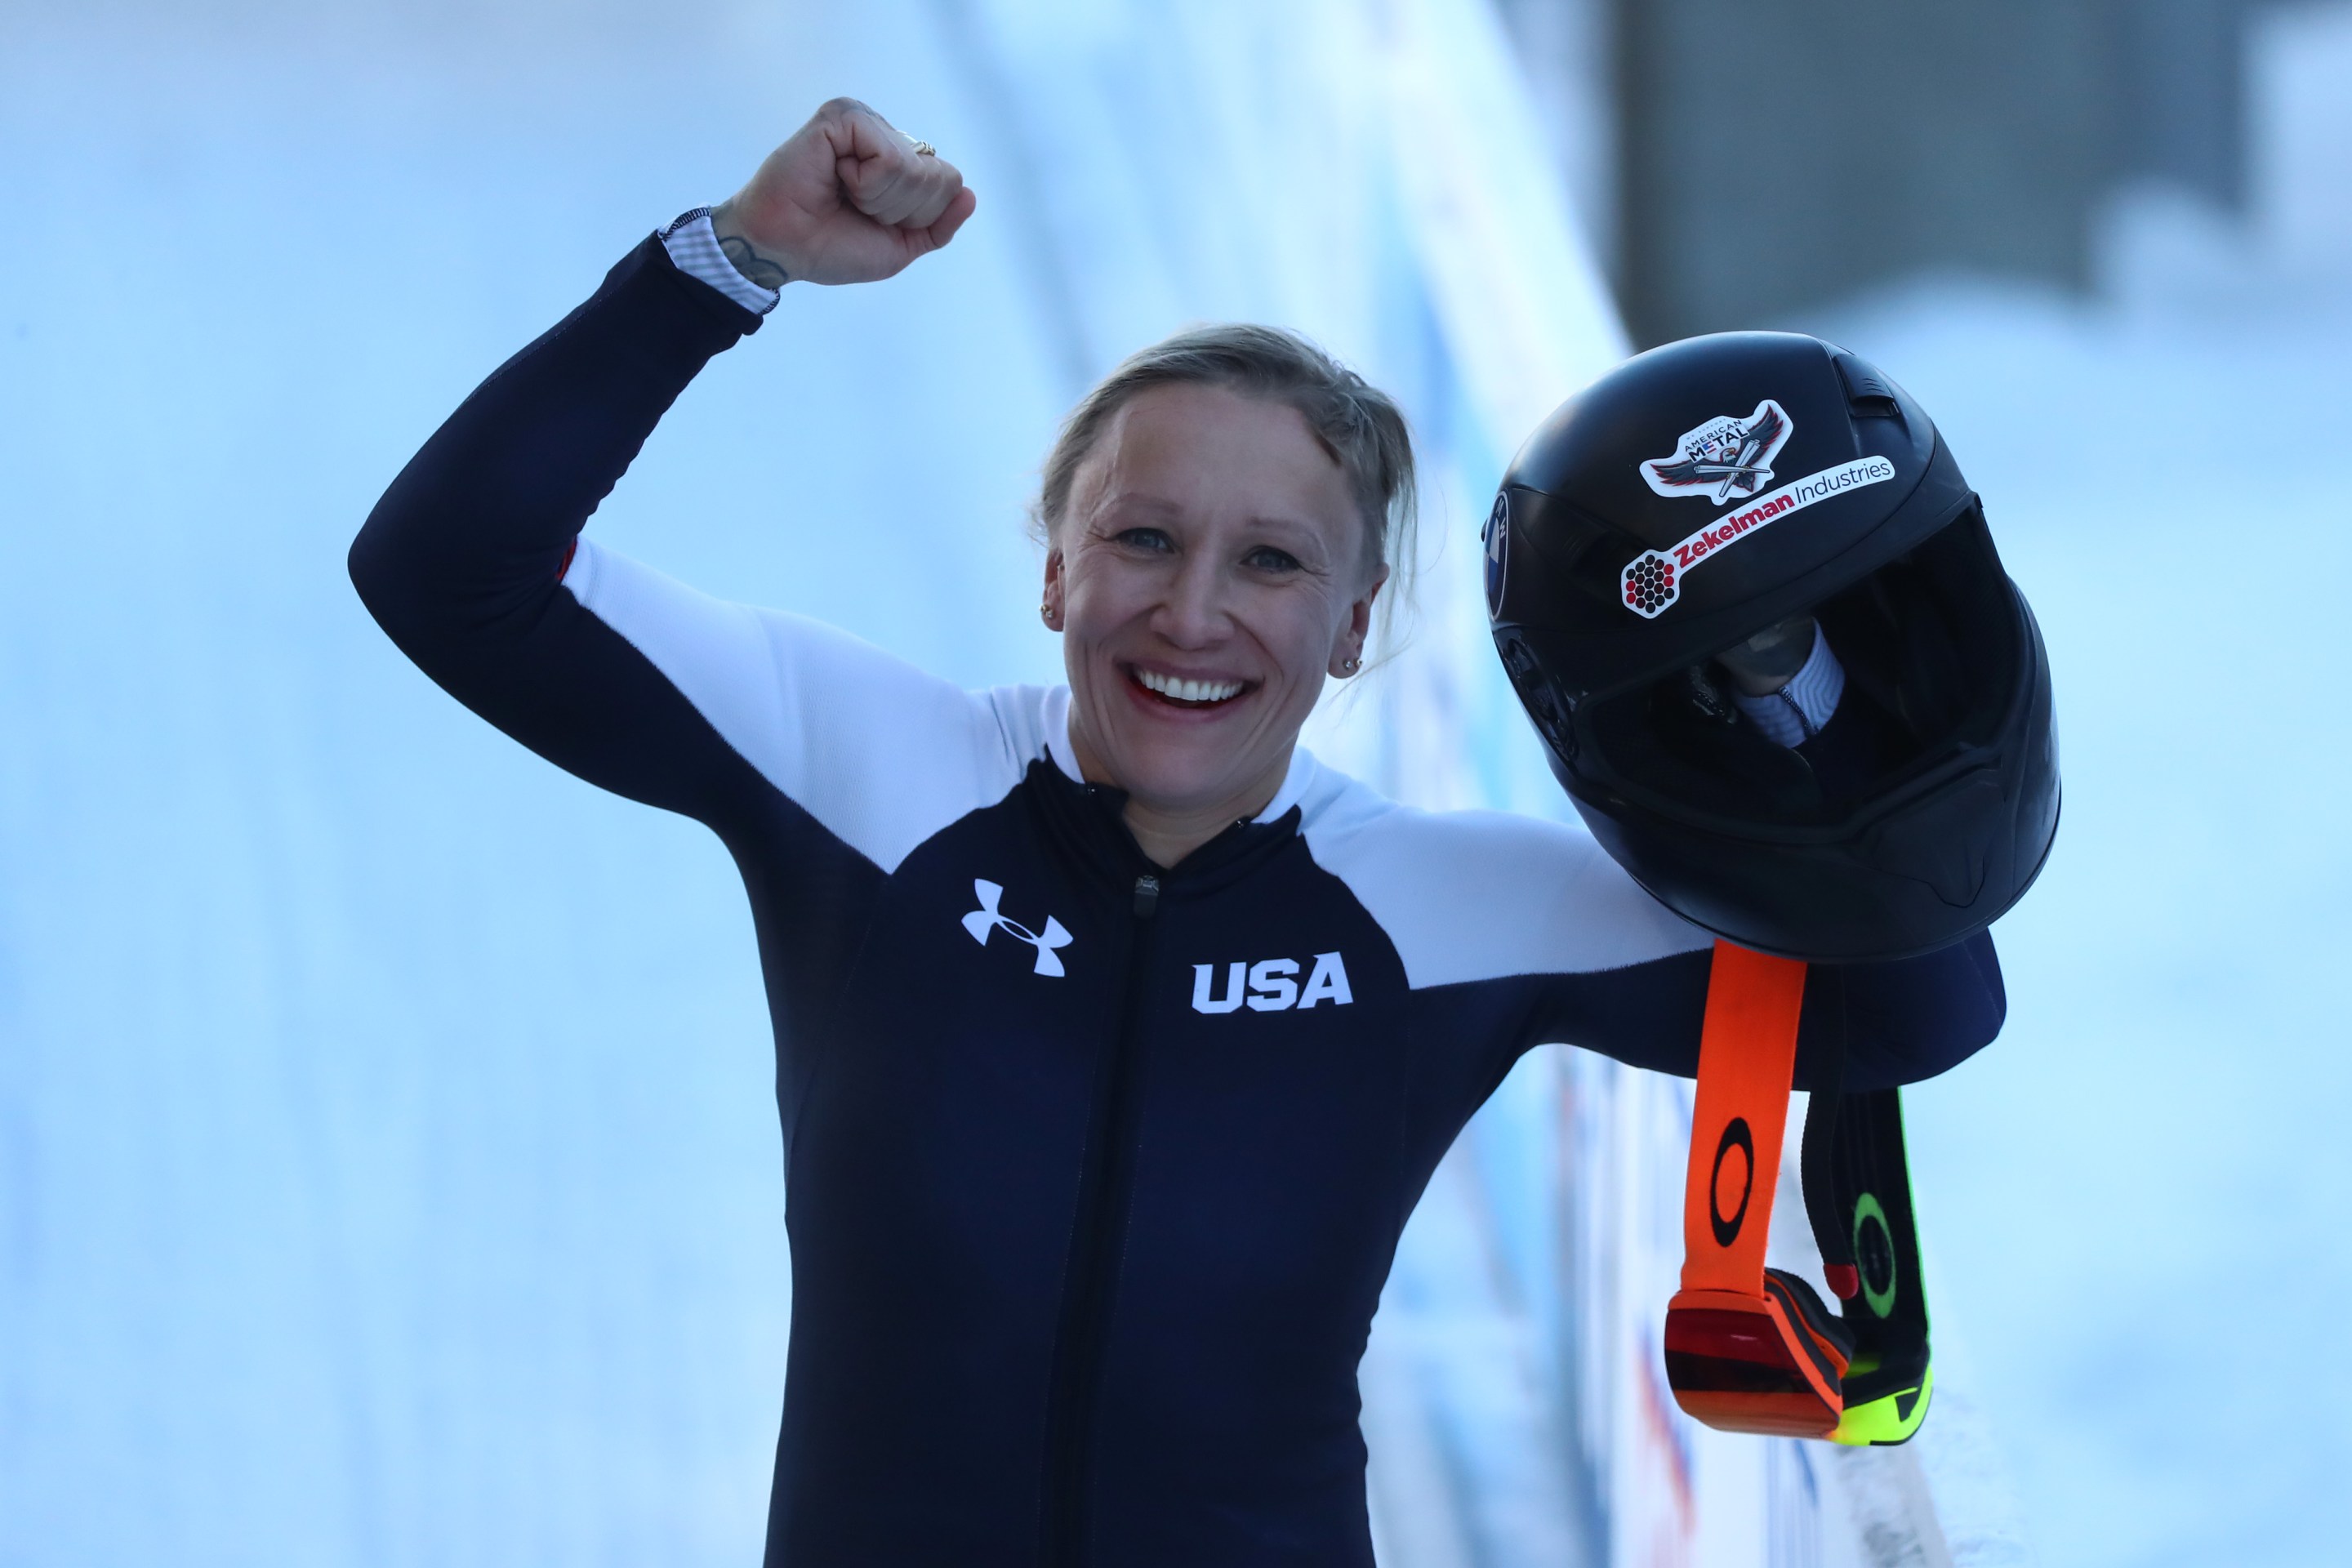 Kaillie Humphries of the United States celebrates winning the Women’s Monobob (Heat 4) at the IBSF World Championships 2021 Altenberg competition at Eiskanal Altenberg on February 14, 2021 in Altenberg, Germany.